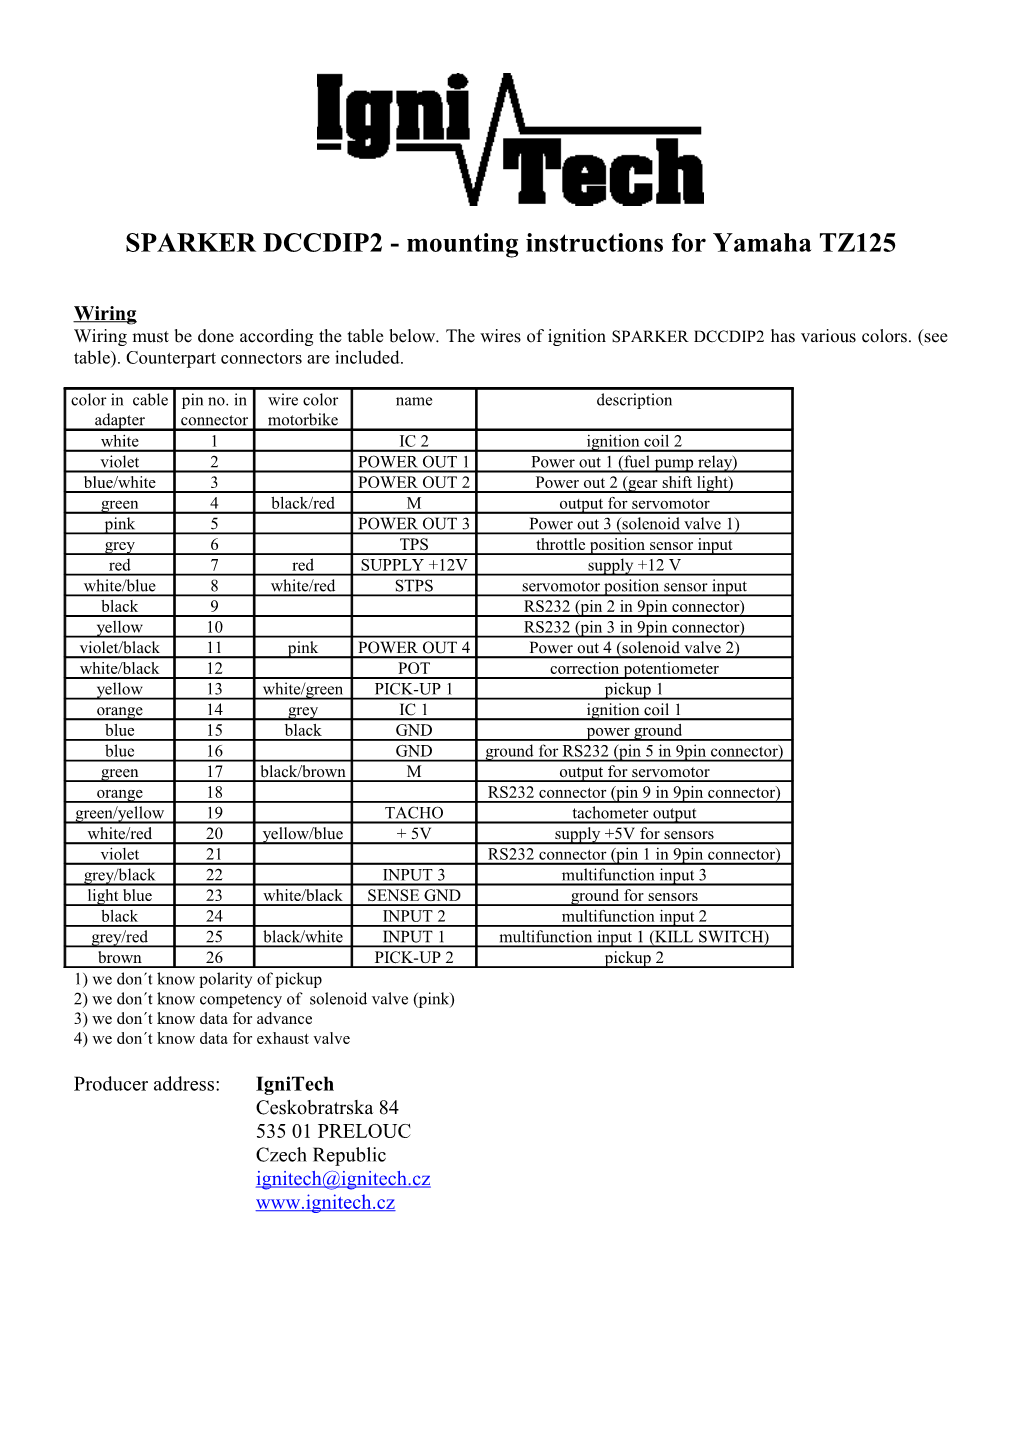 SPARKER DCCDIP2 - Mounting Instructions for Yamaha TZ125